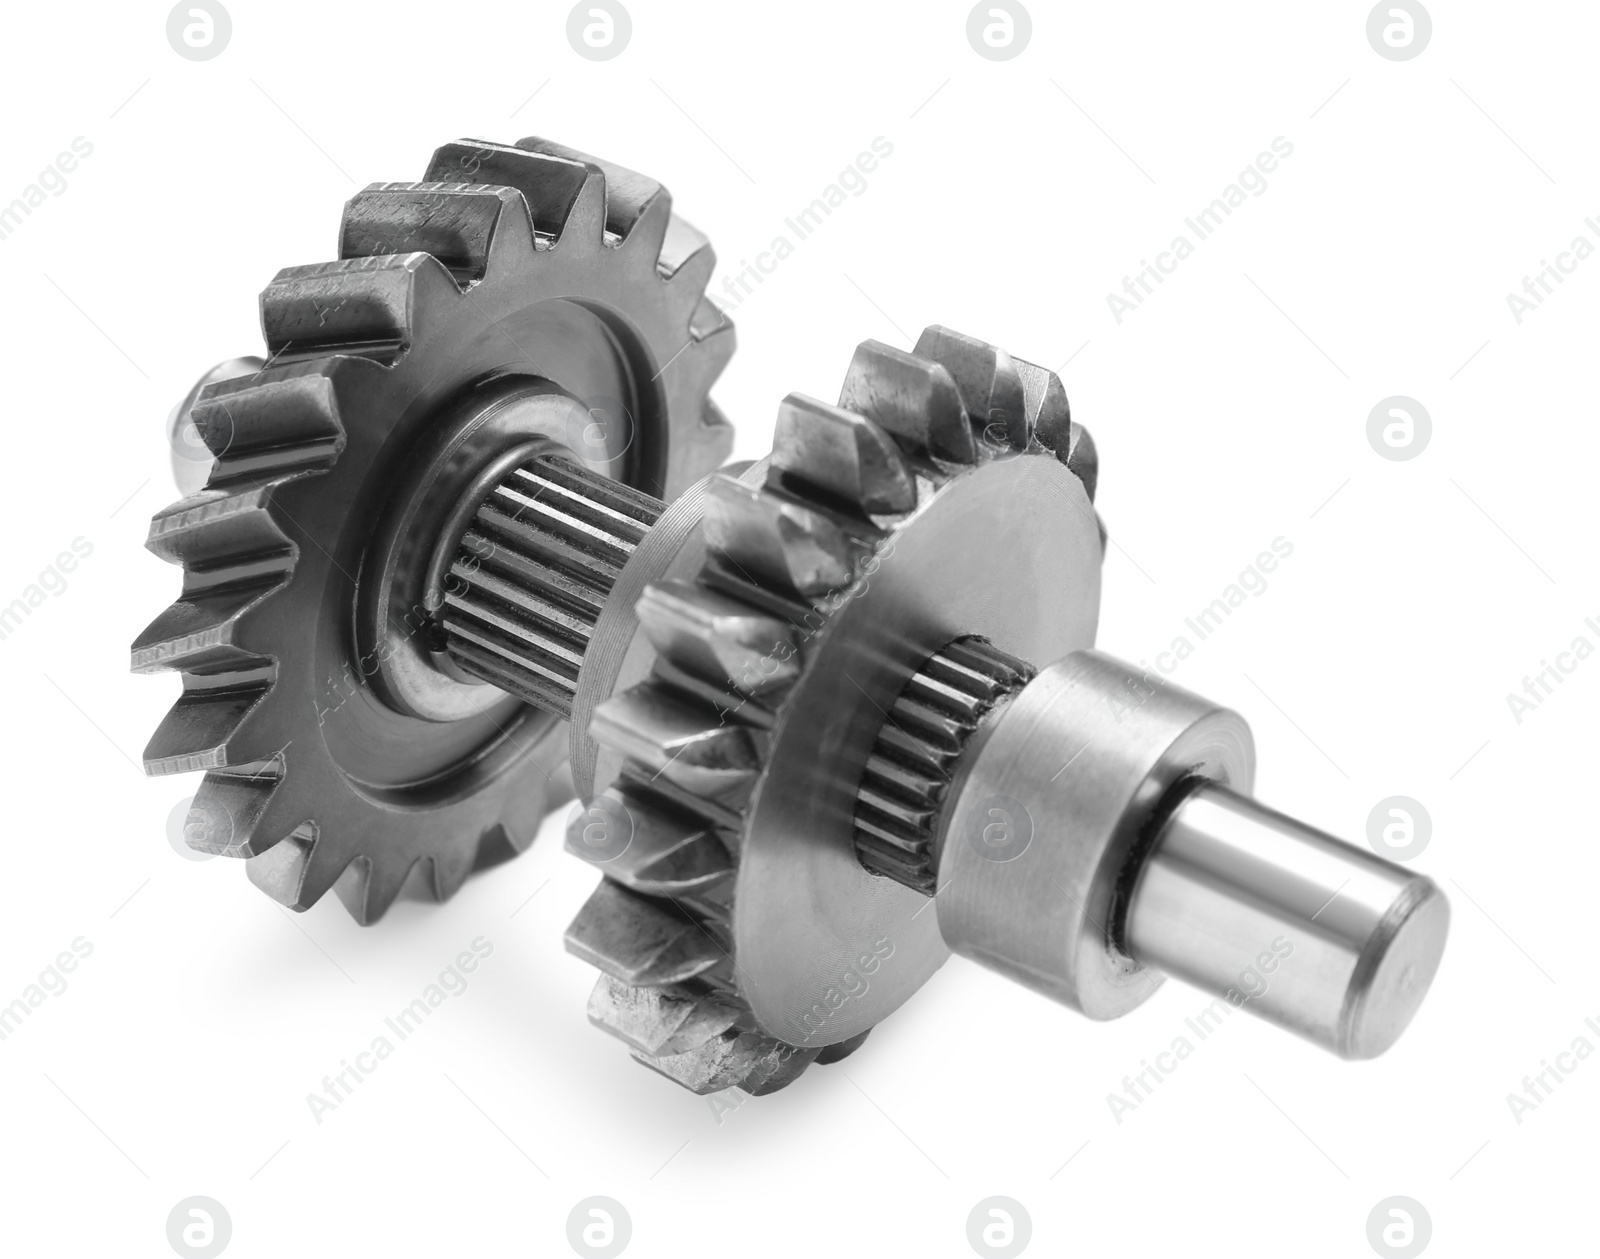 Photo of New mechanical transmission gear isolated on white